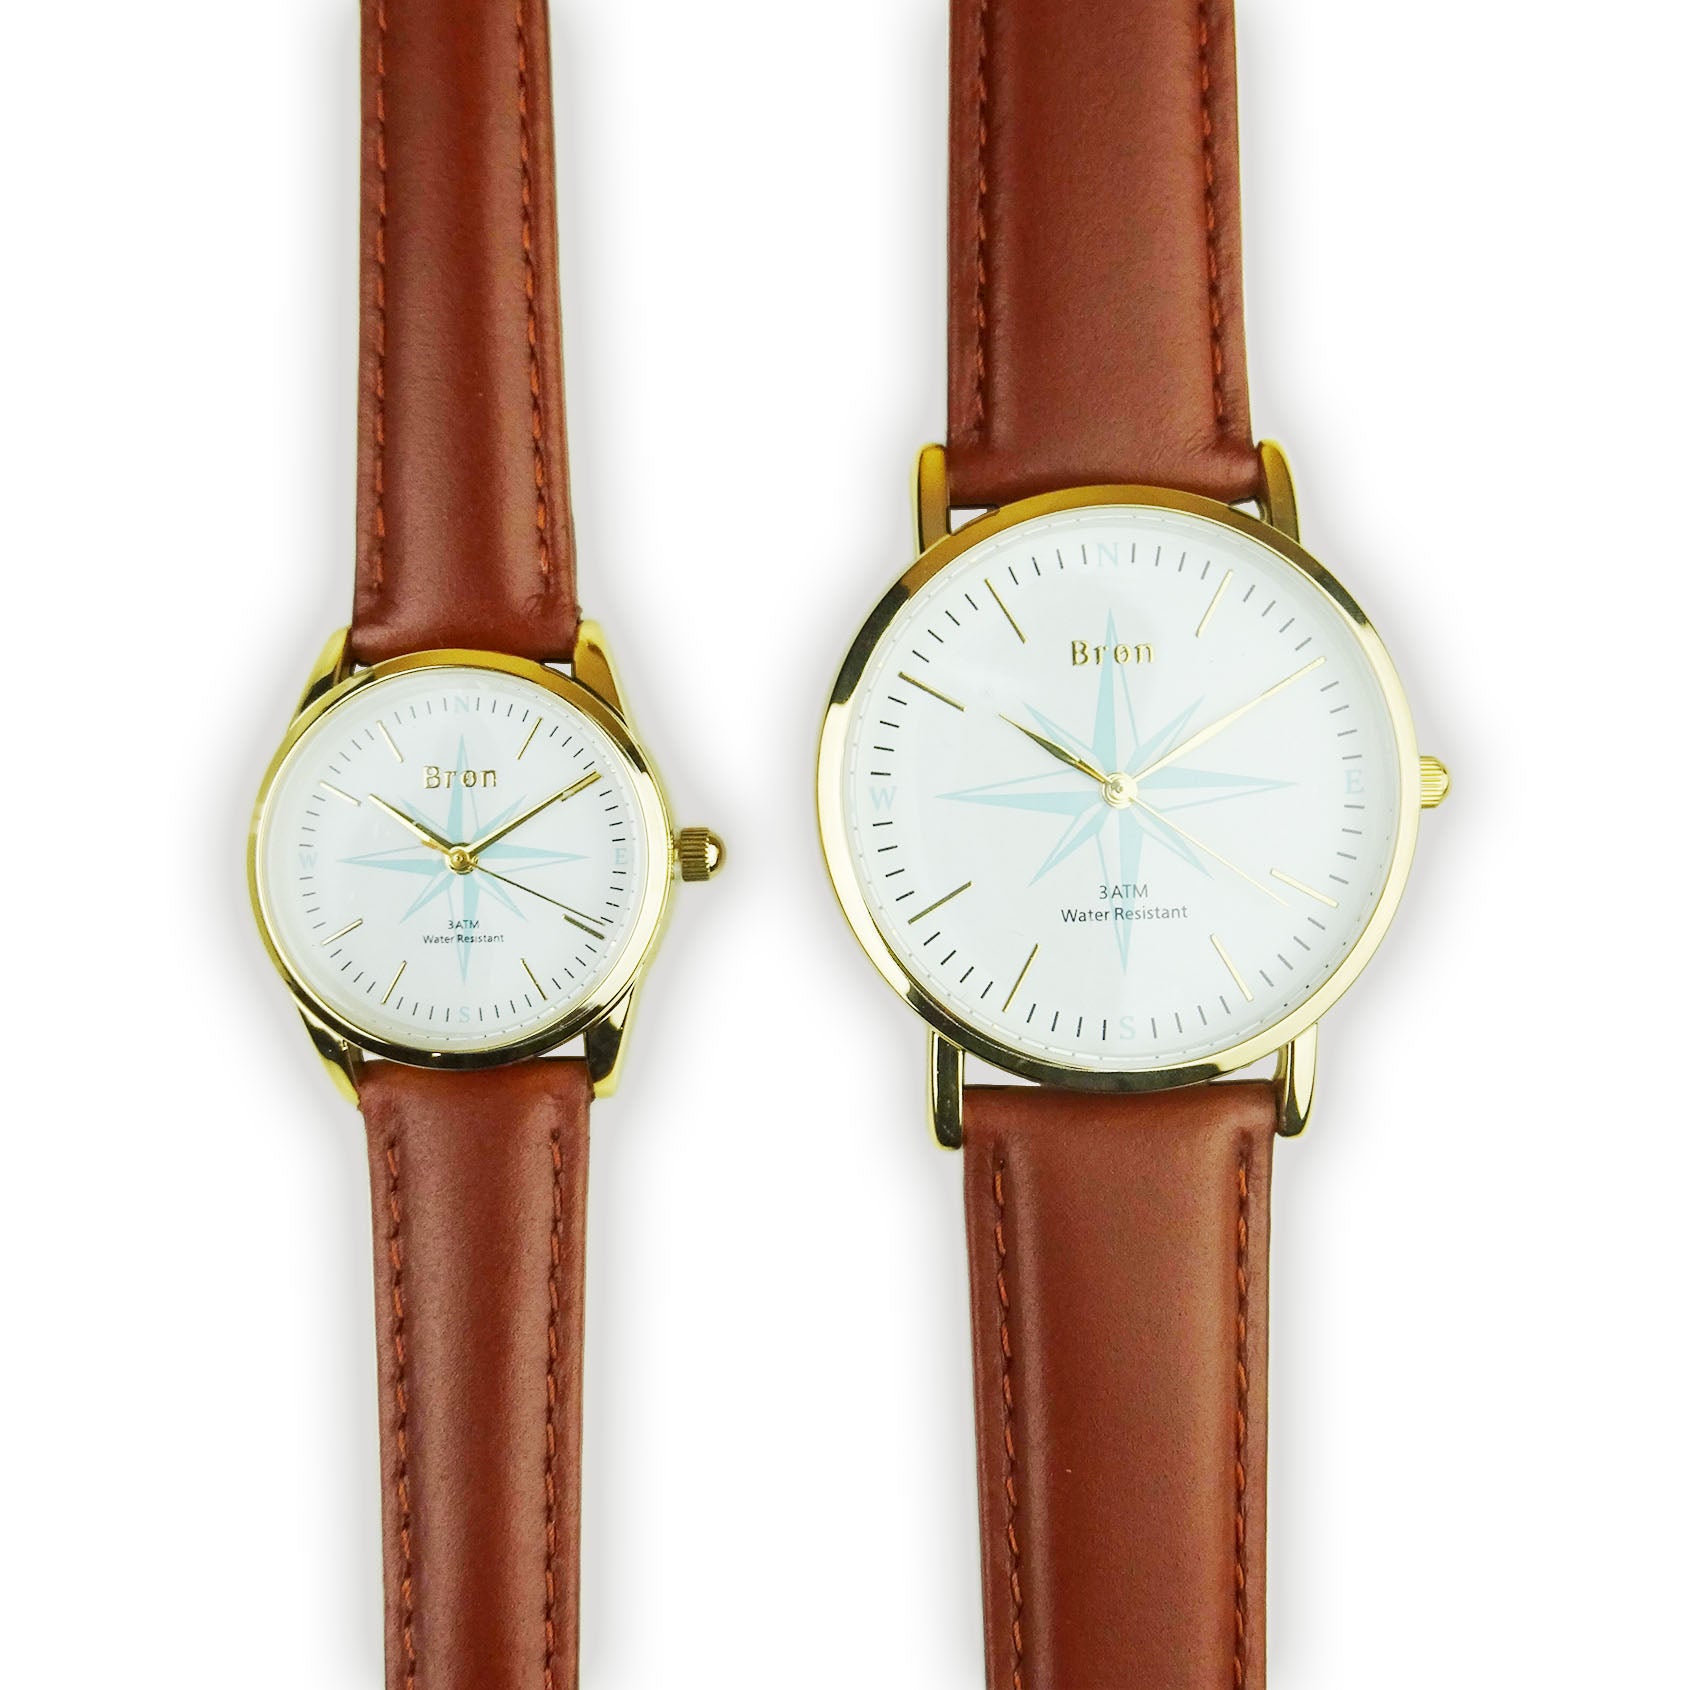 Ladies watch in gold with nautical compass